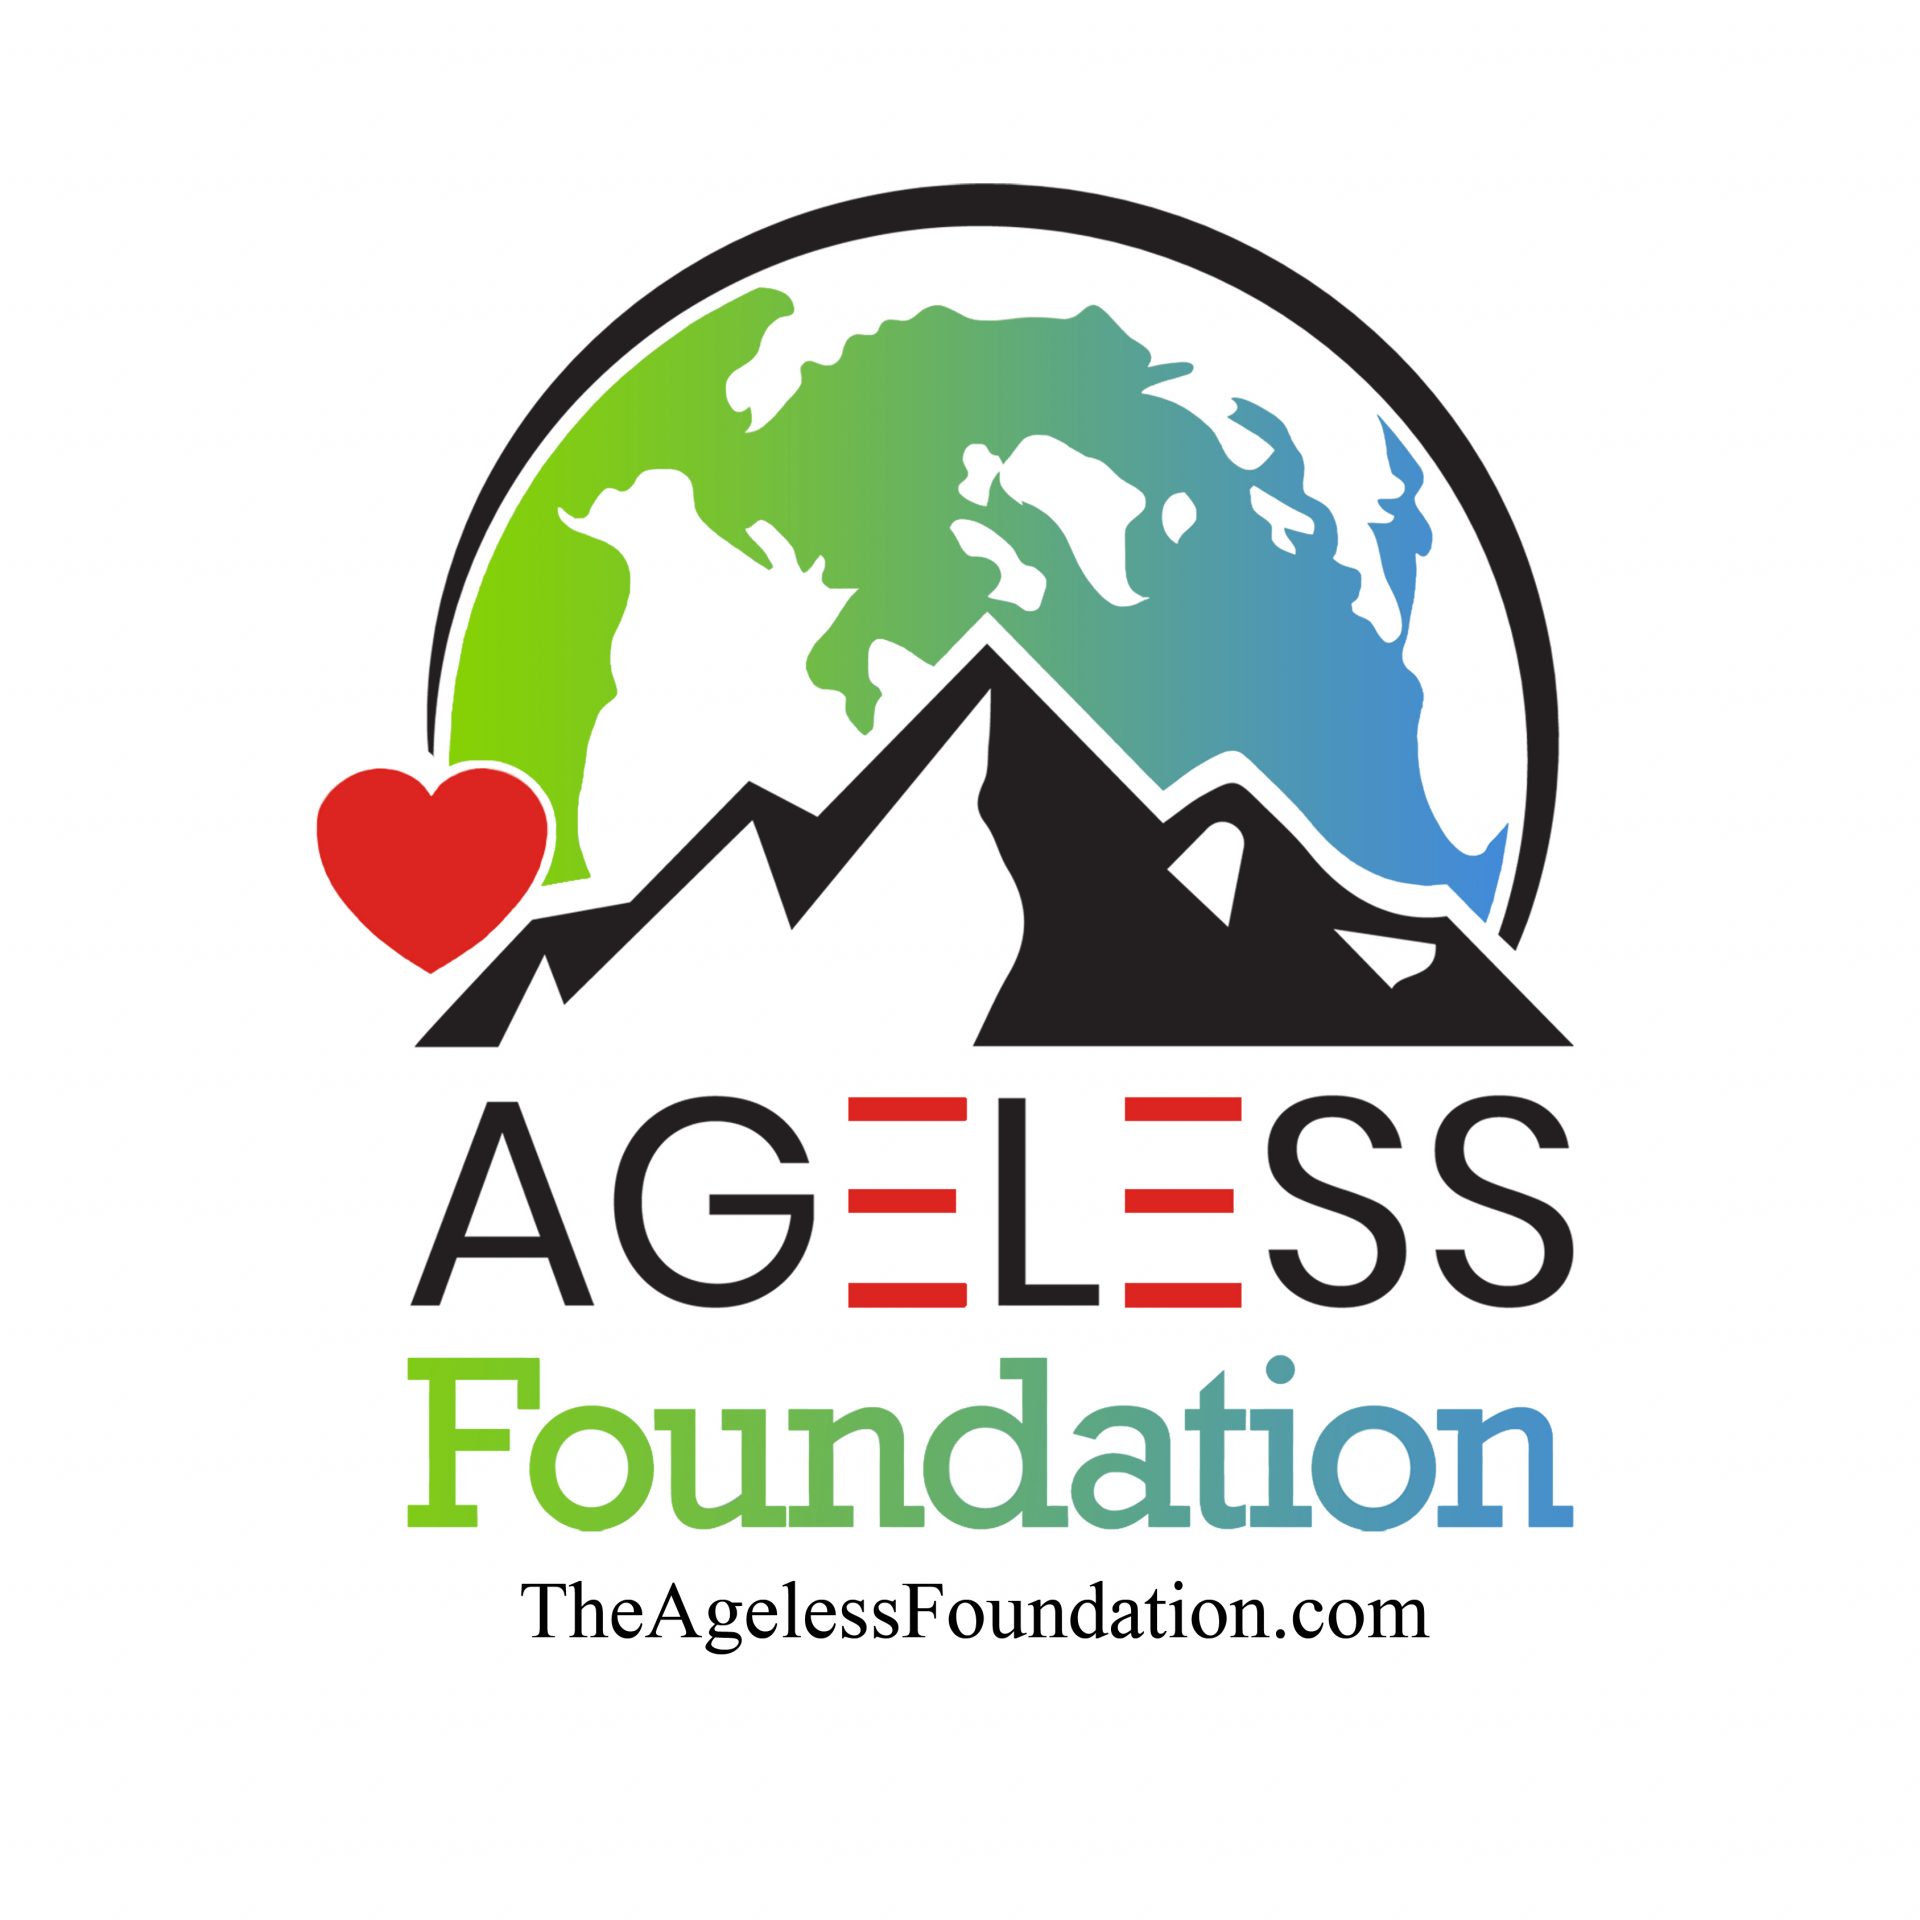 The Ageless Foundation